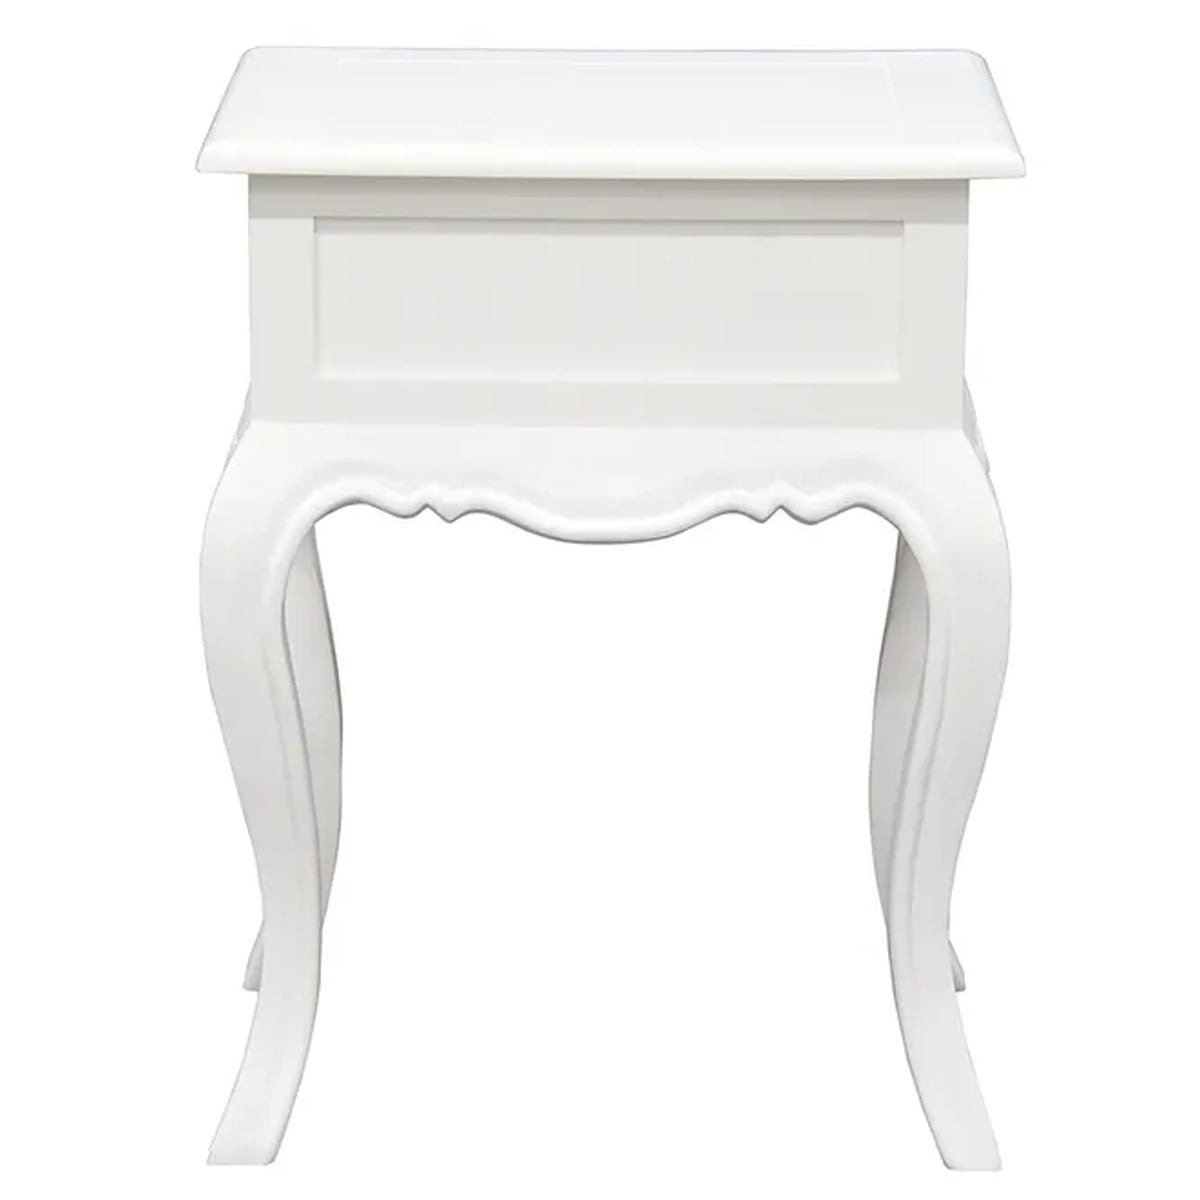 Coita French Provincial Single Drawer Side Table - White - Notbrand